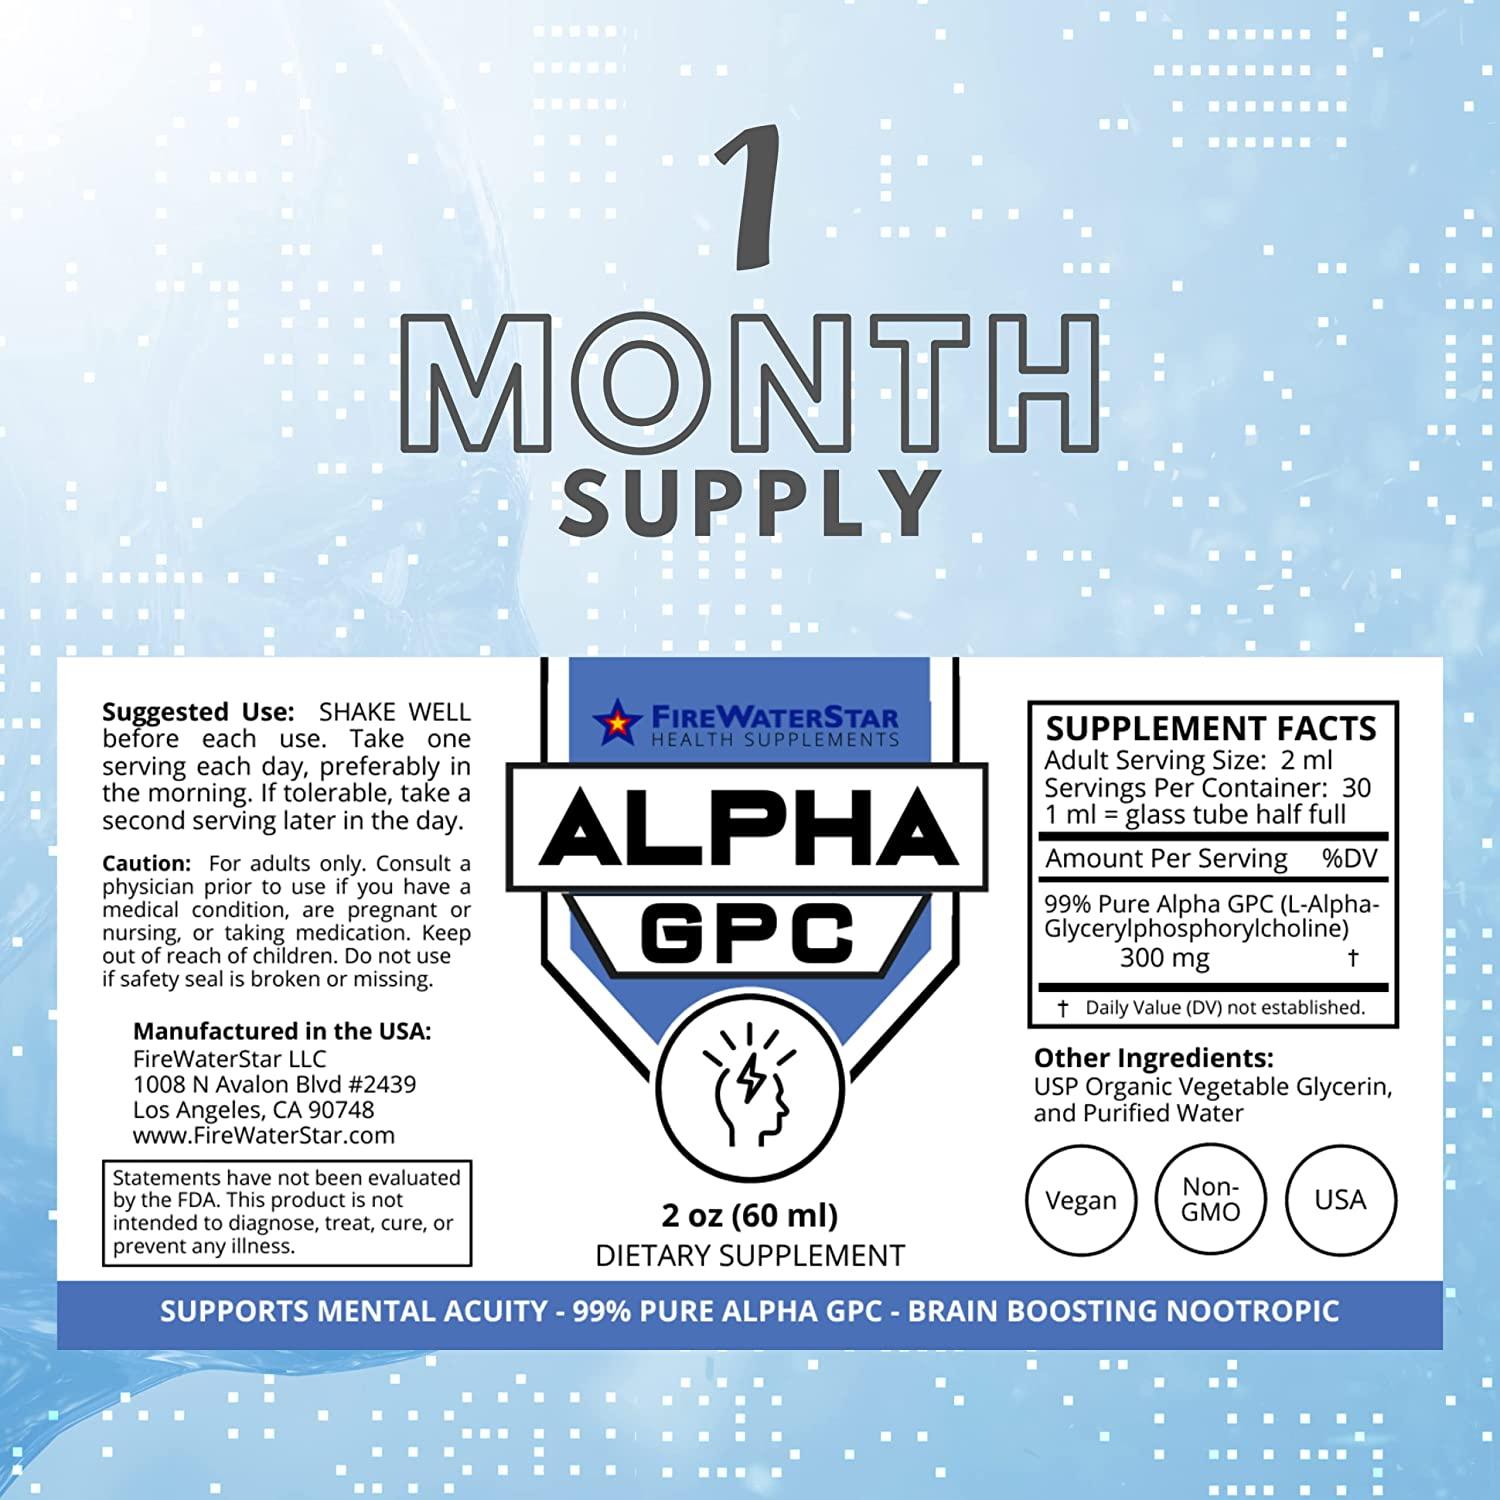 Alpha GPC - Liquid Drops - 99% Pure L-Alpha-GPC - 300mg - 2oz - 30 Day  Supply - Non-GMO - Brain Boosting Nootropic - Supports Attention,  Concentration, Energy, Focus, Memory, Mood and Sharpness